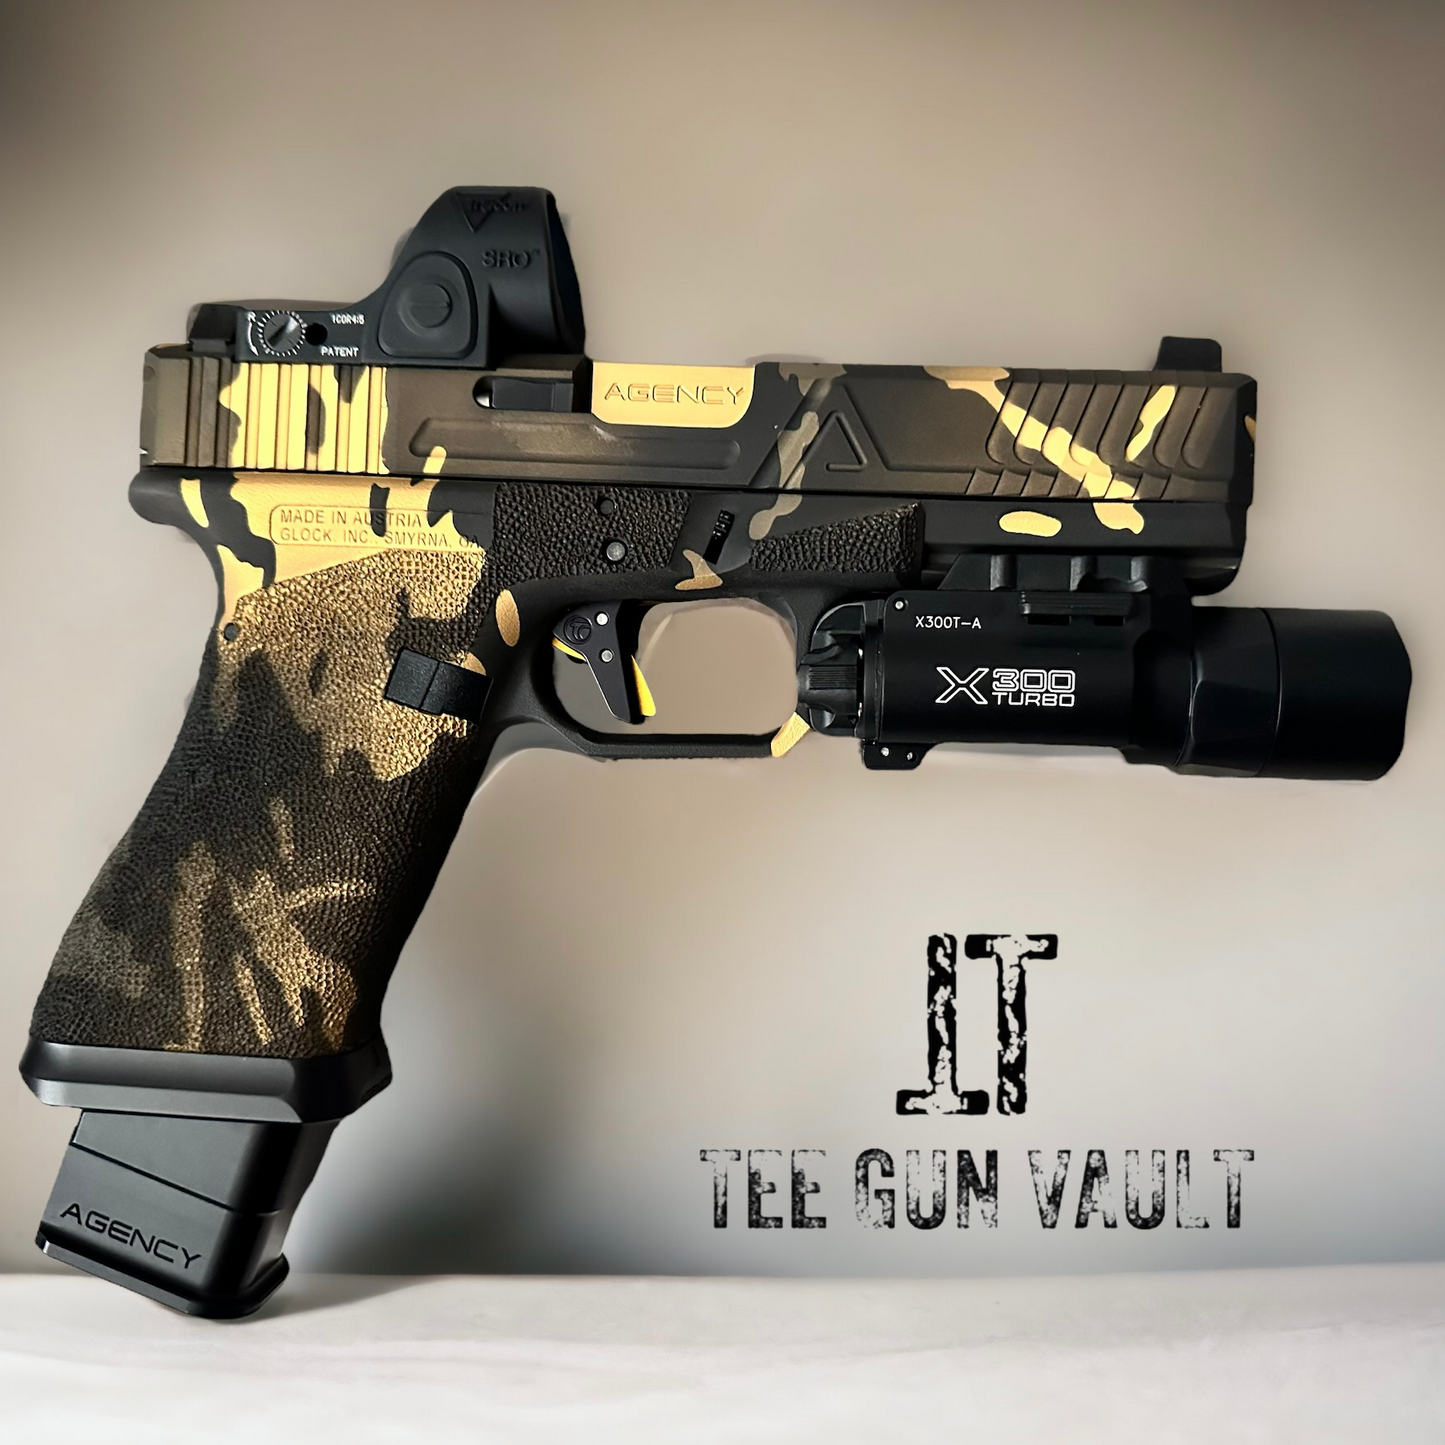 Agency Arms Glock 17 Multi cam Gold with timney (like new)